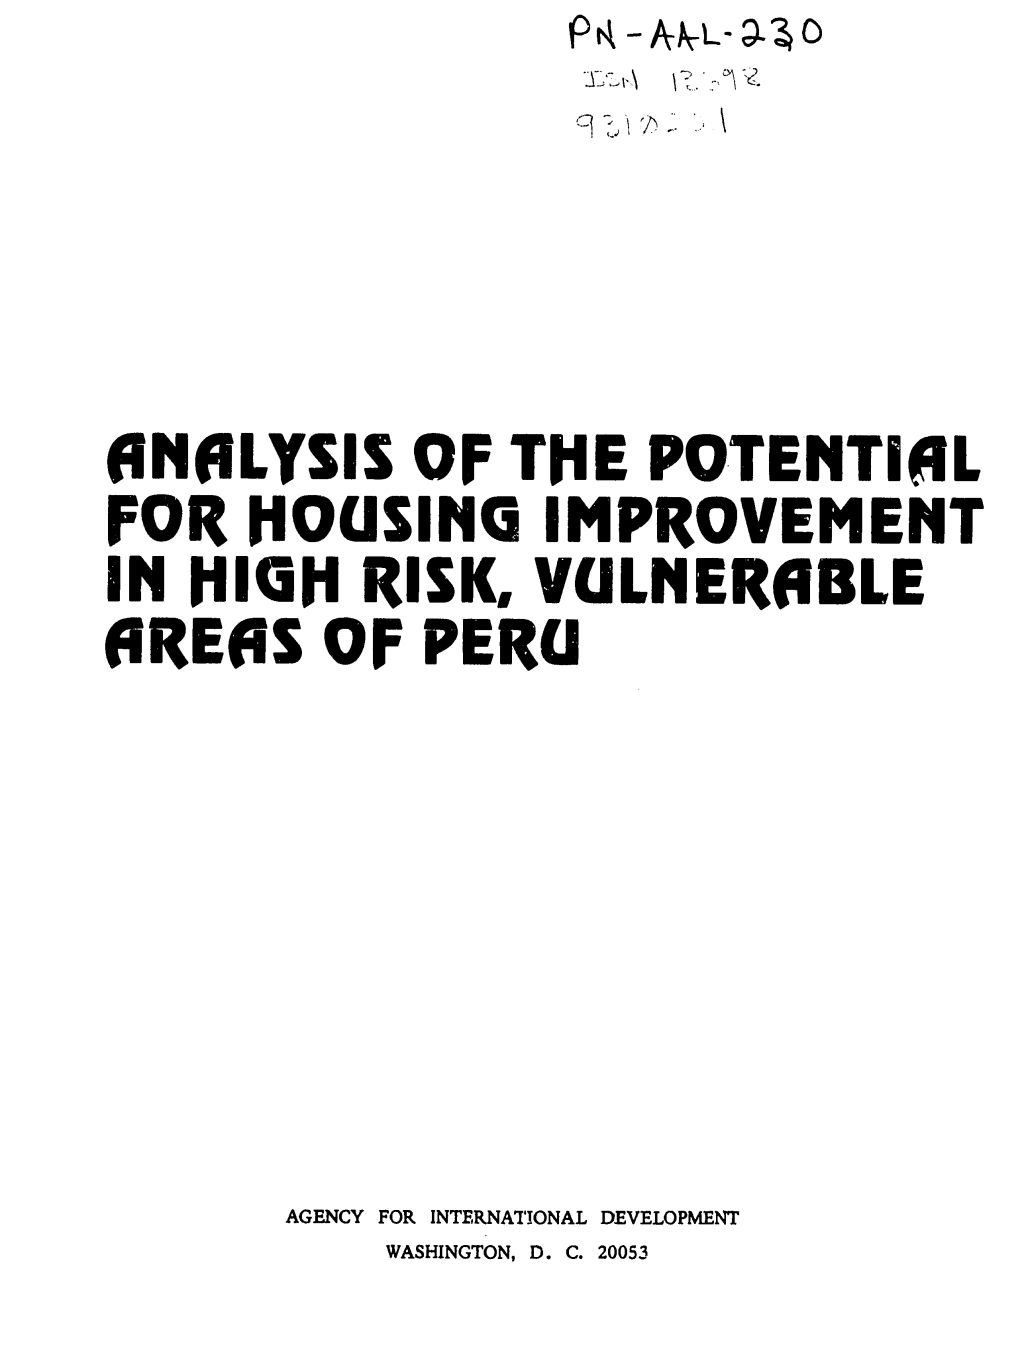 An6lysis of the Potential for Housing Improvement in High Risk, Vulner6ble Are0s of Peru